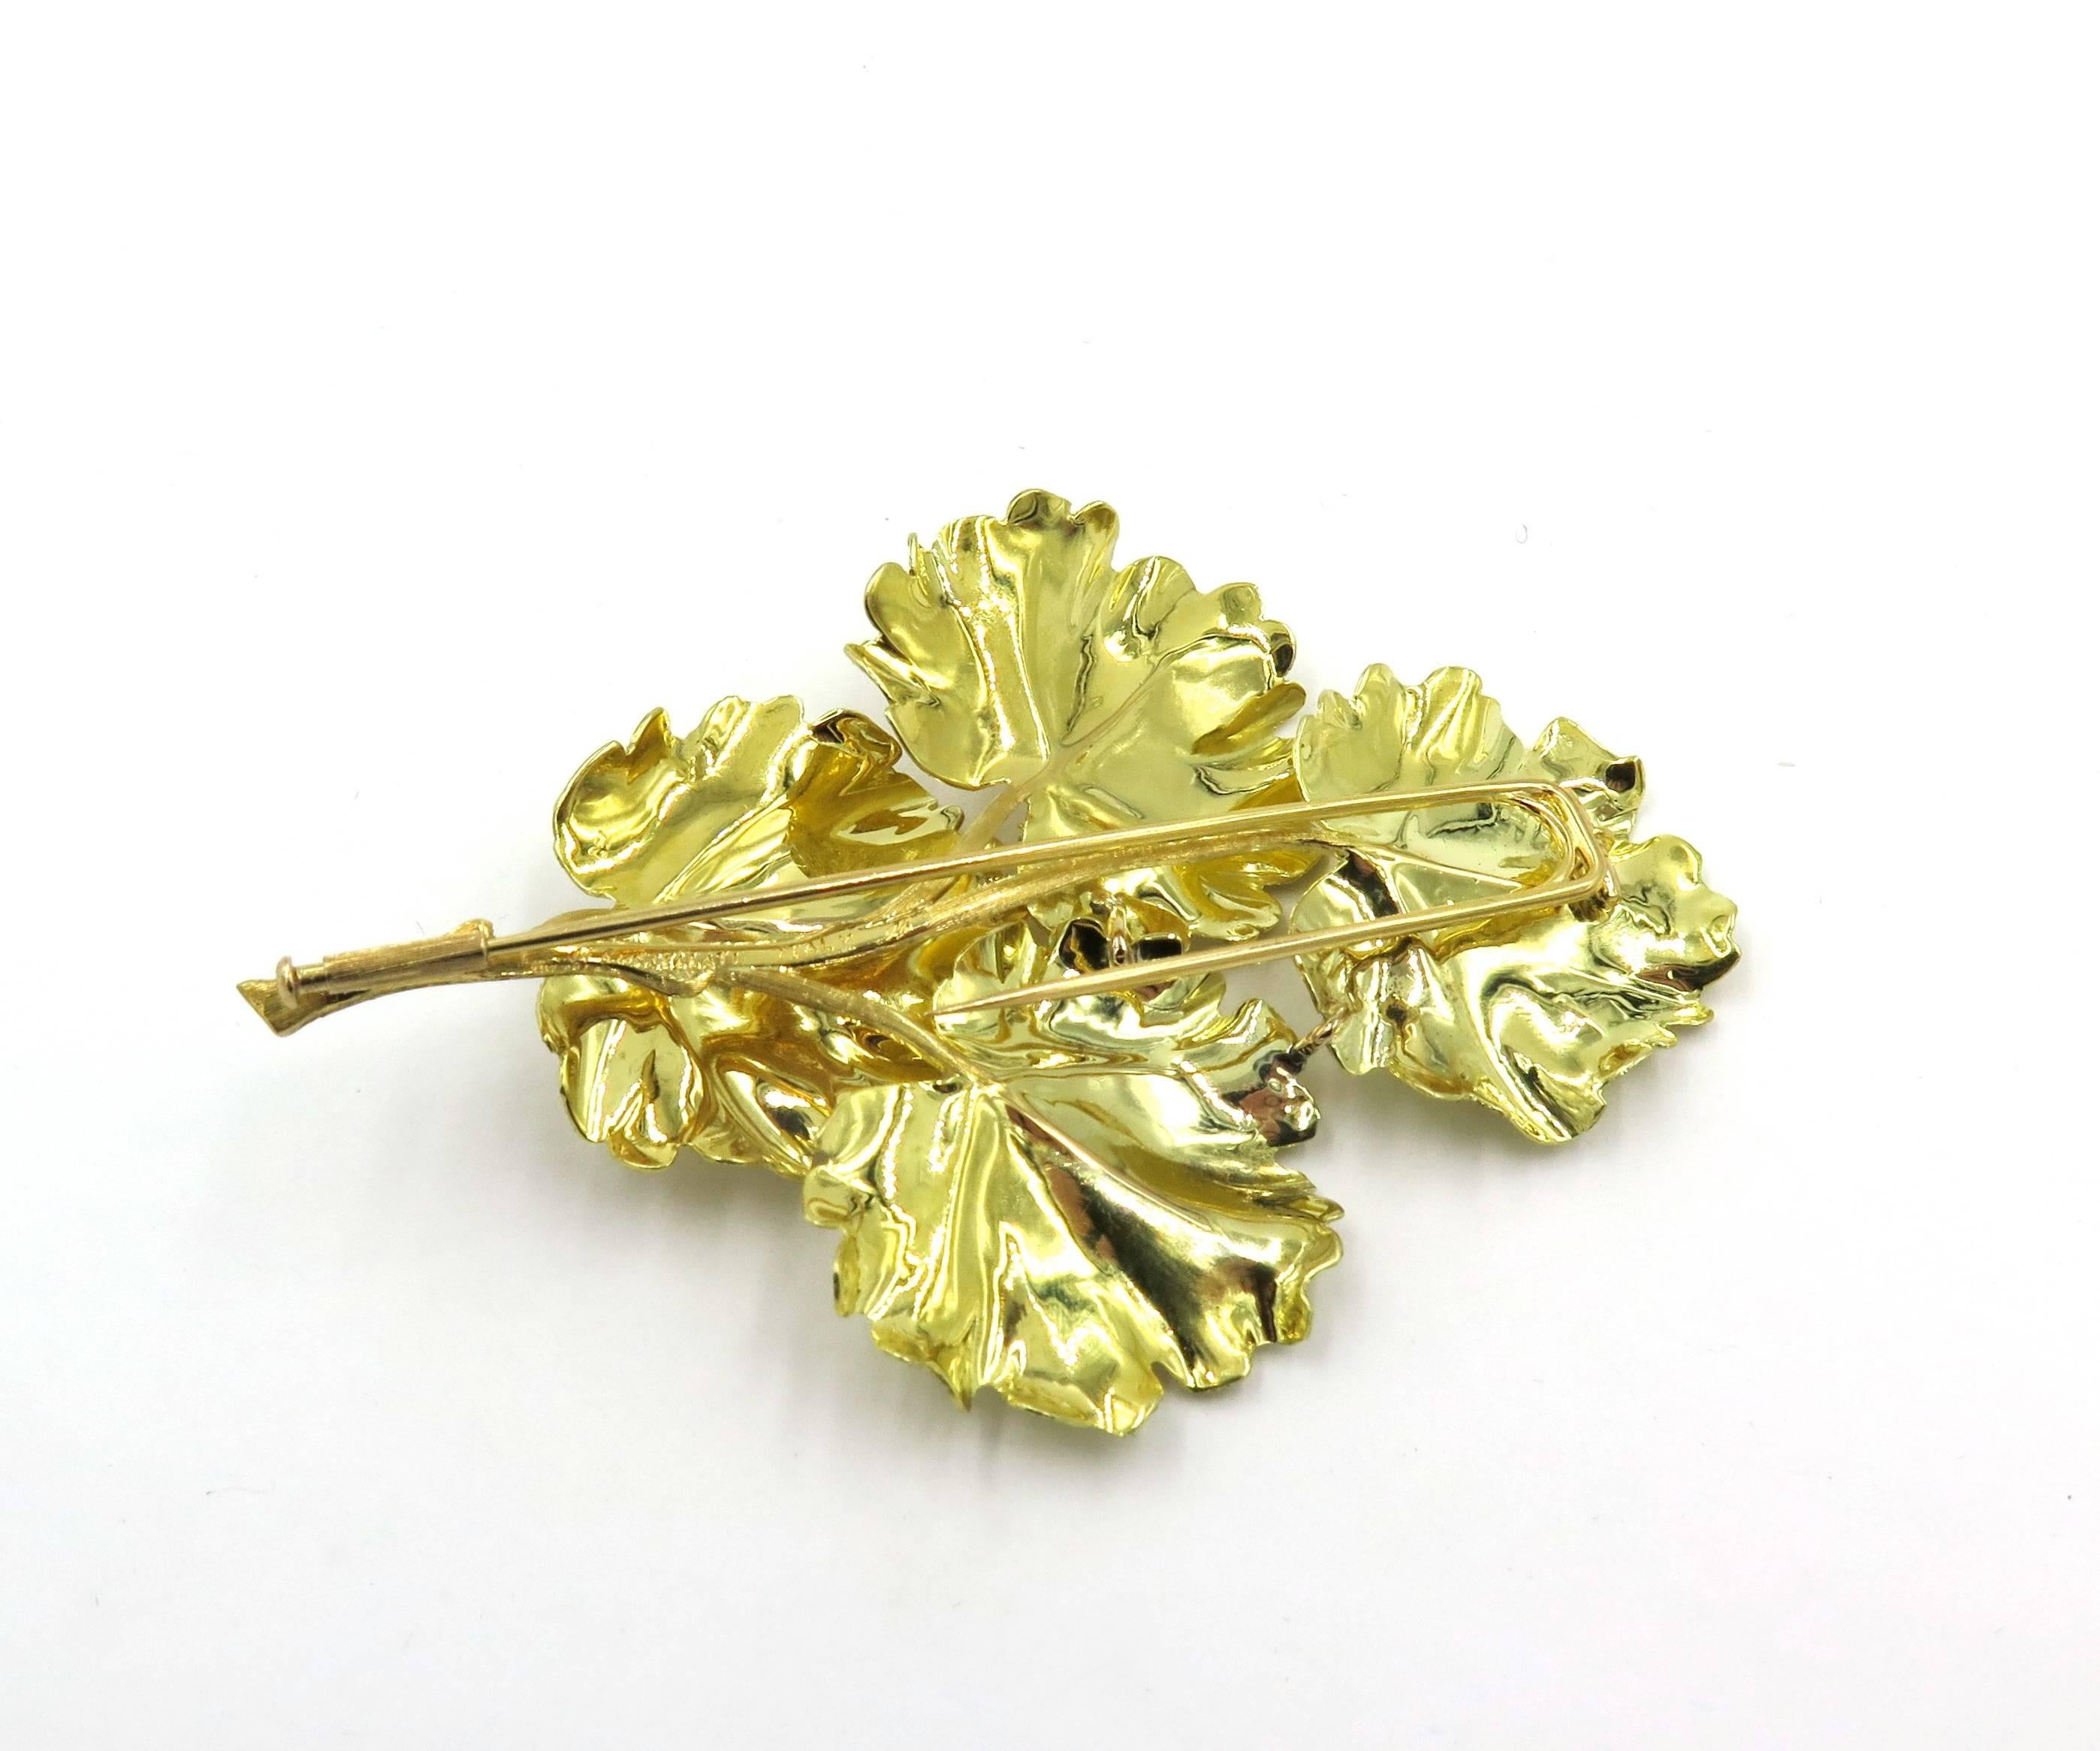 An 18 karat yellow gold brooch. Mario Buccellati. Circa 1960. Designed as textured geranium leaves on a stem. Length is approximately 3 1/4 inches. Gross weight is approximately 27.9 grams. Stamped M. Buccellati, Italy. 